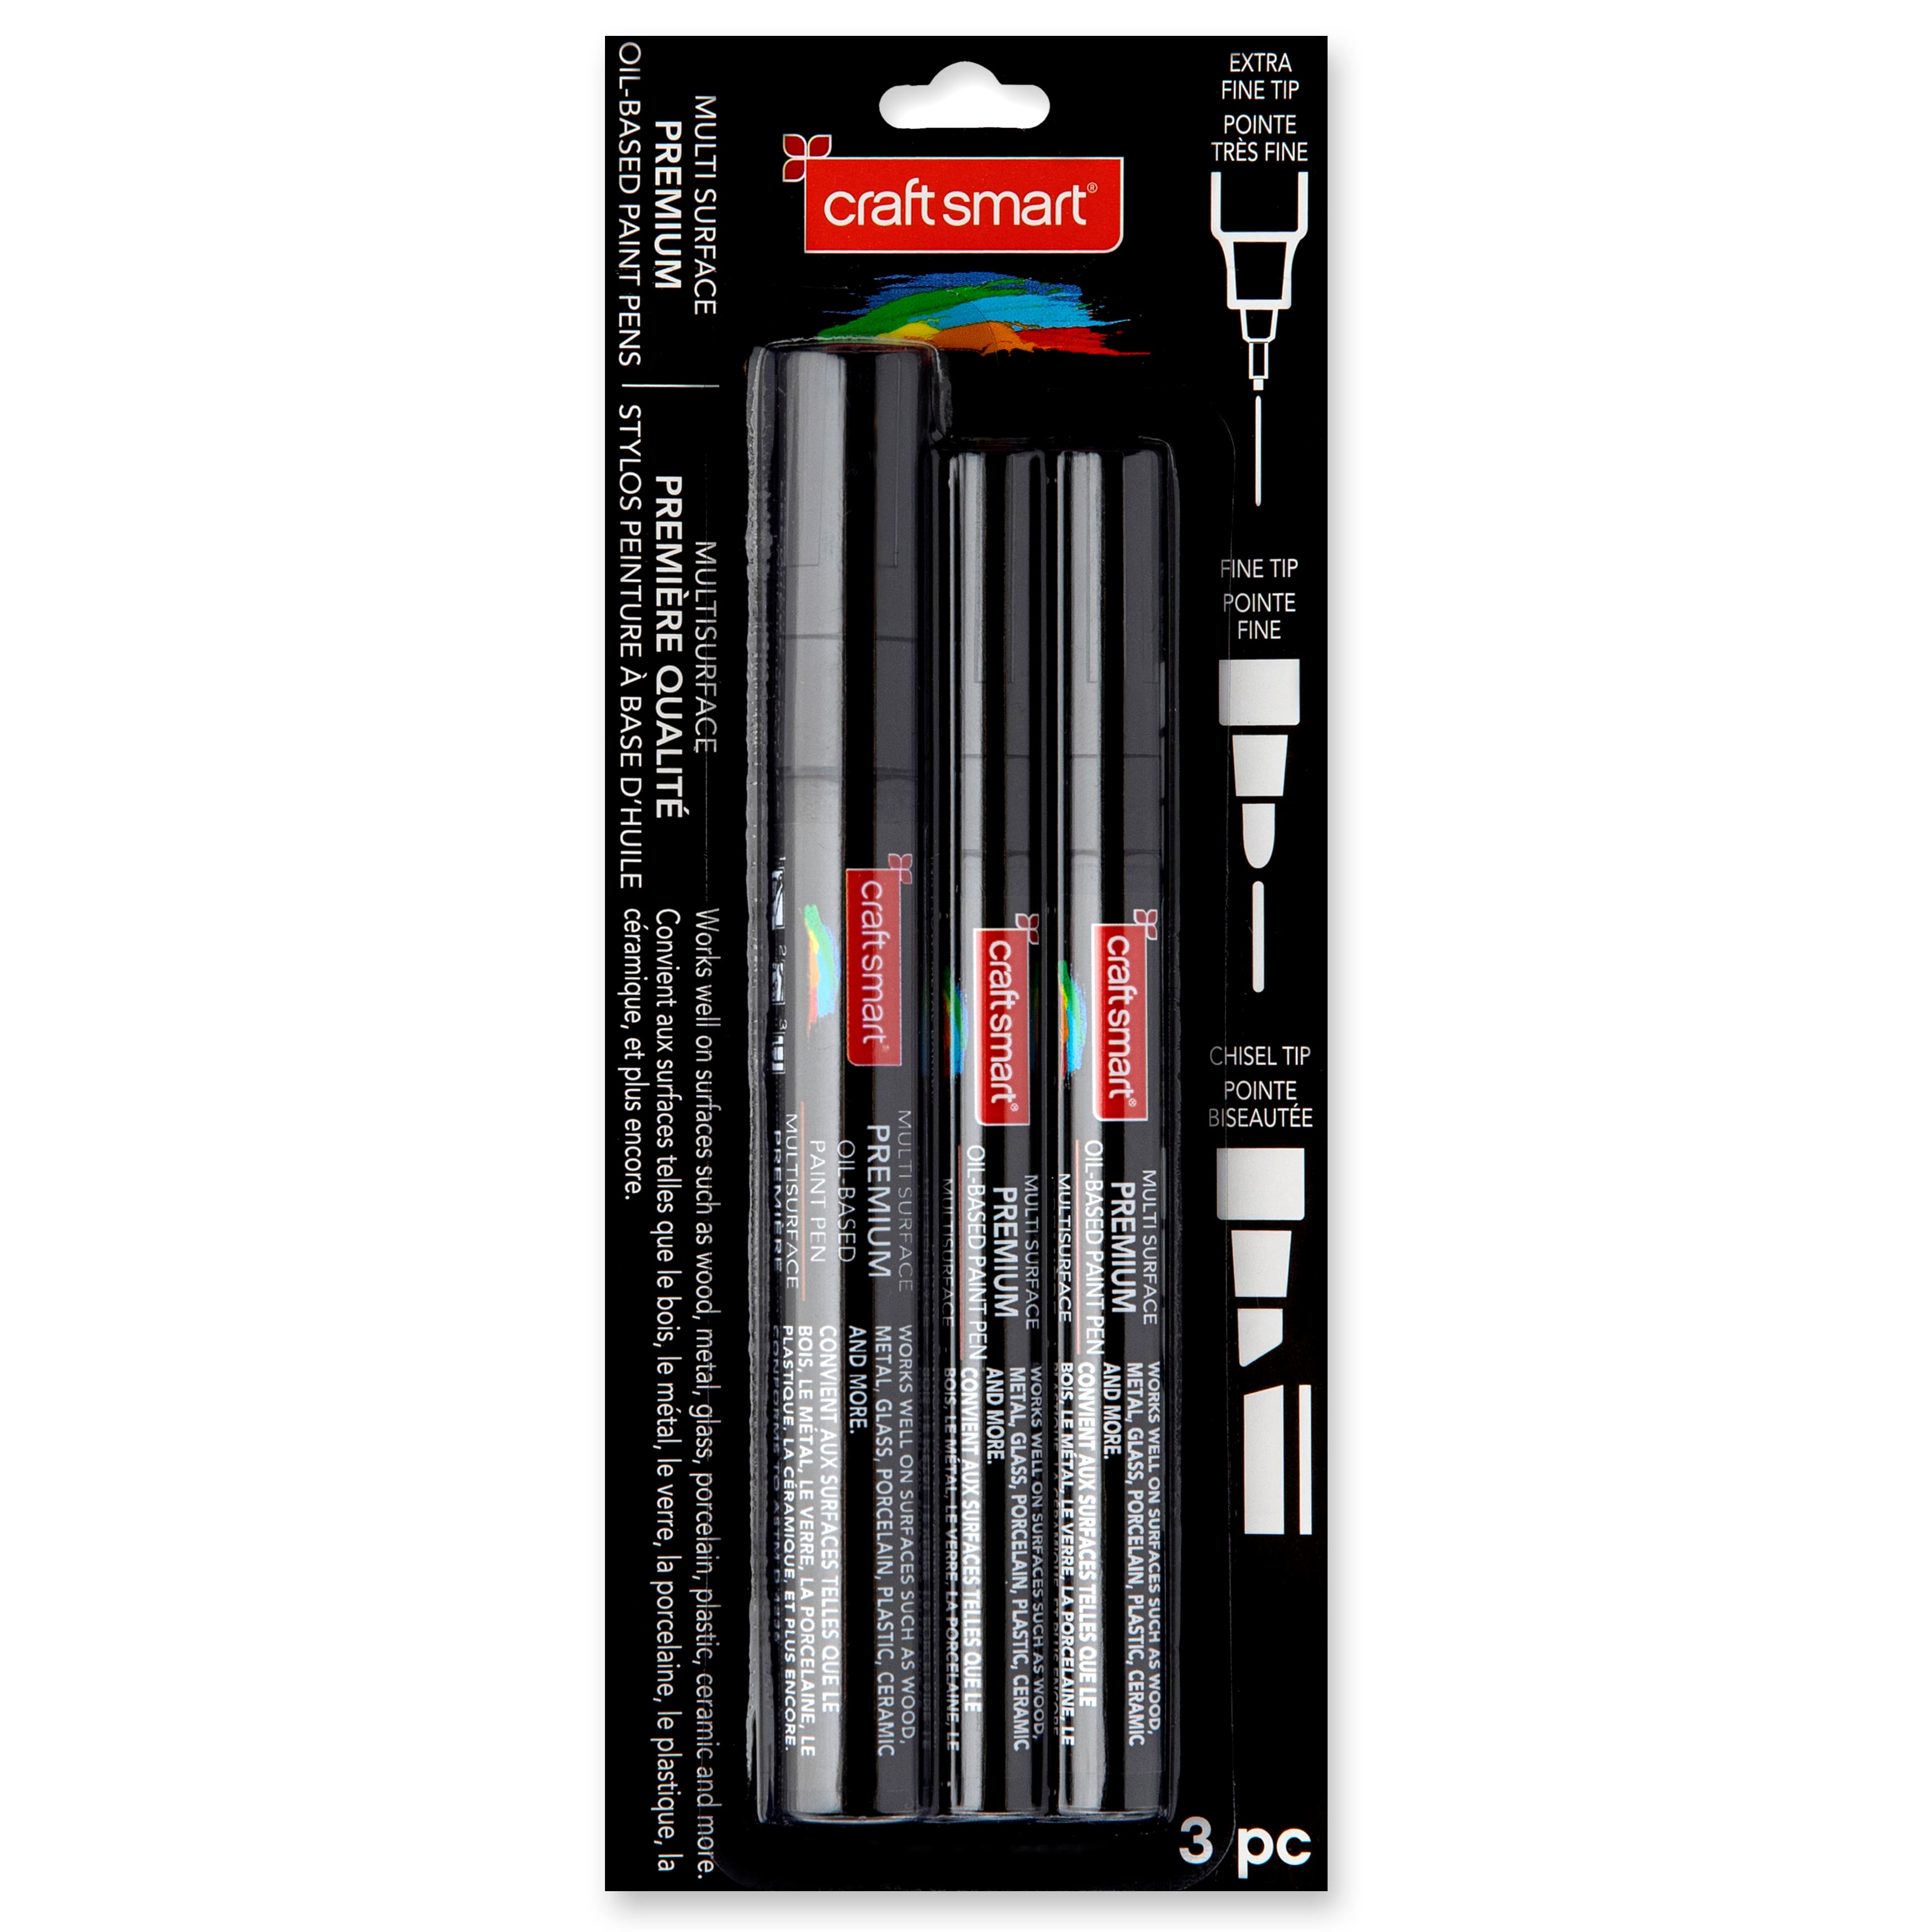 Premium Fine Tip Oil-Based Paint Pens by Craft Smart®